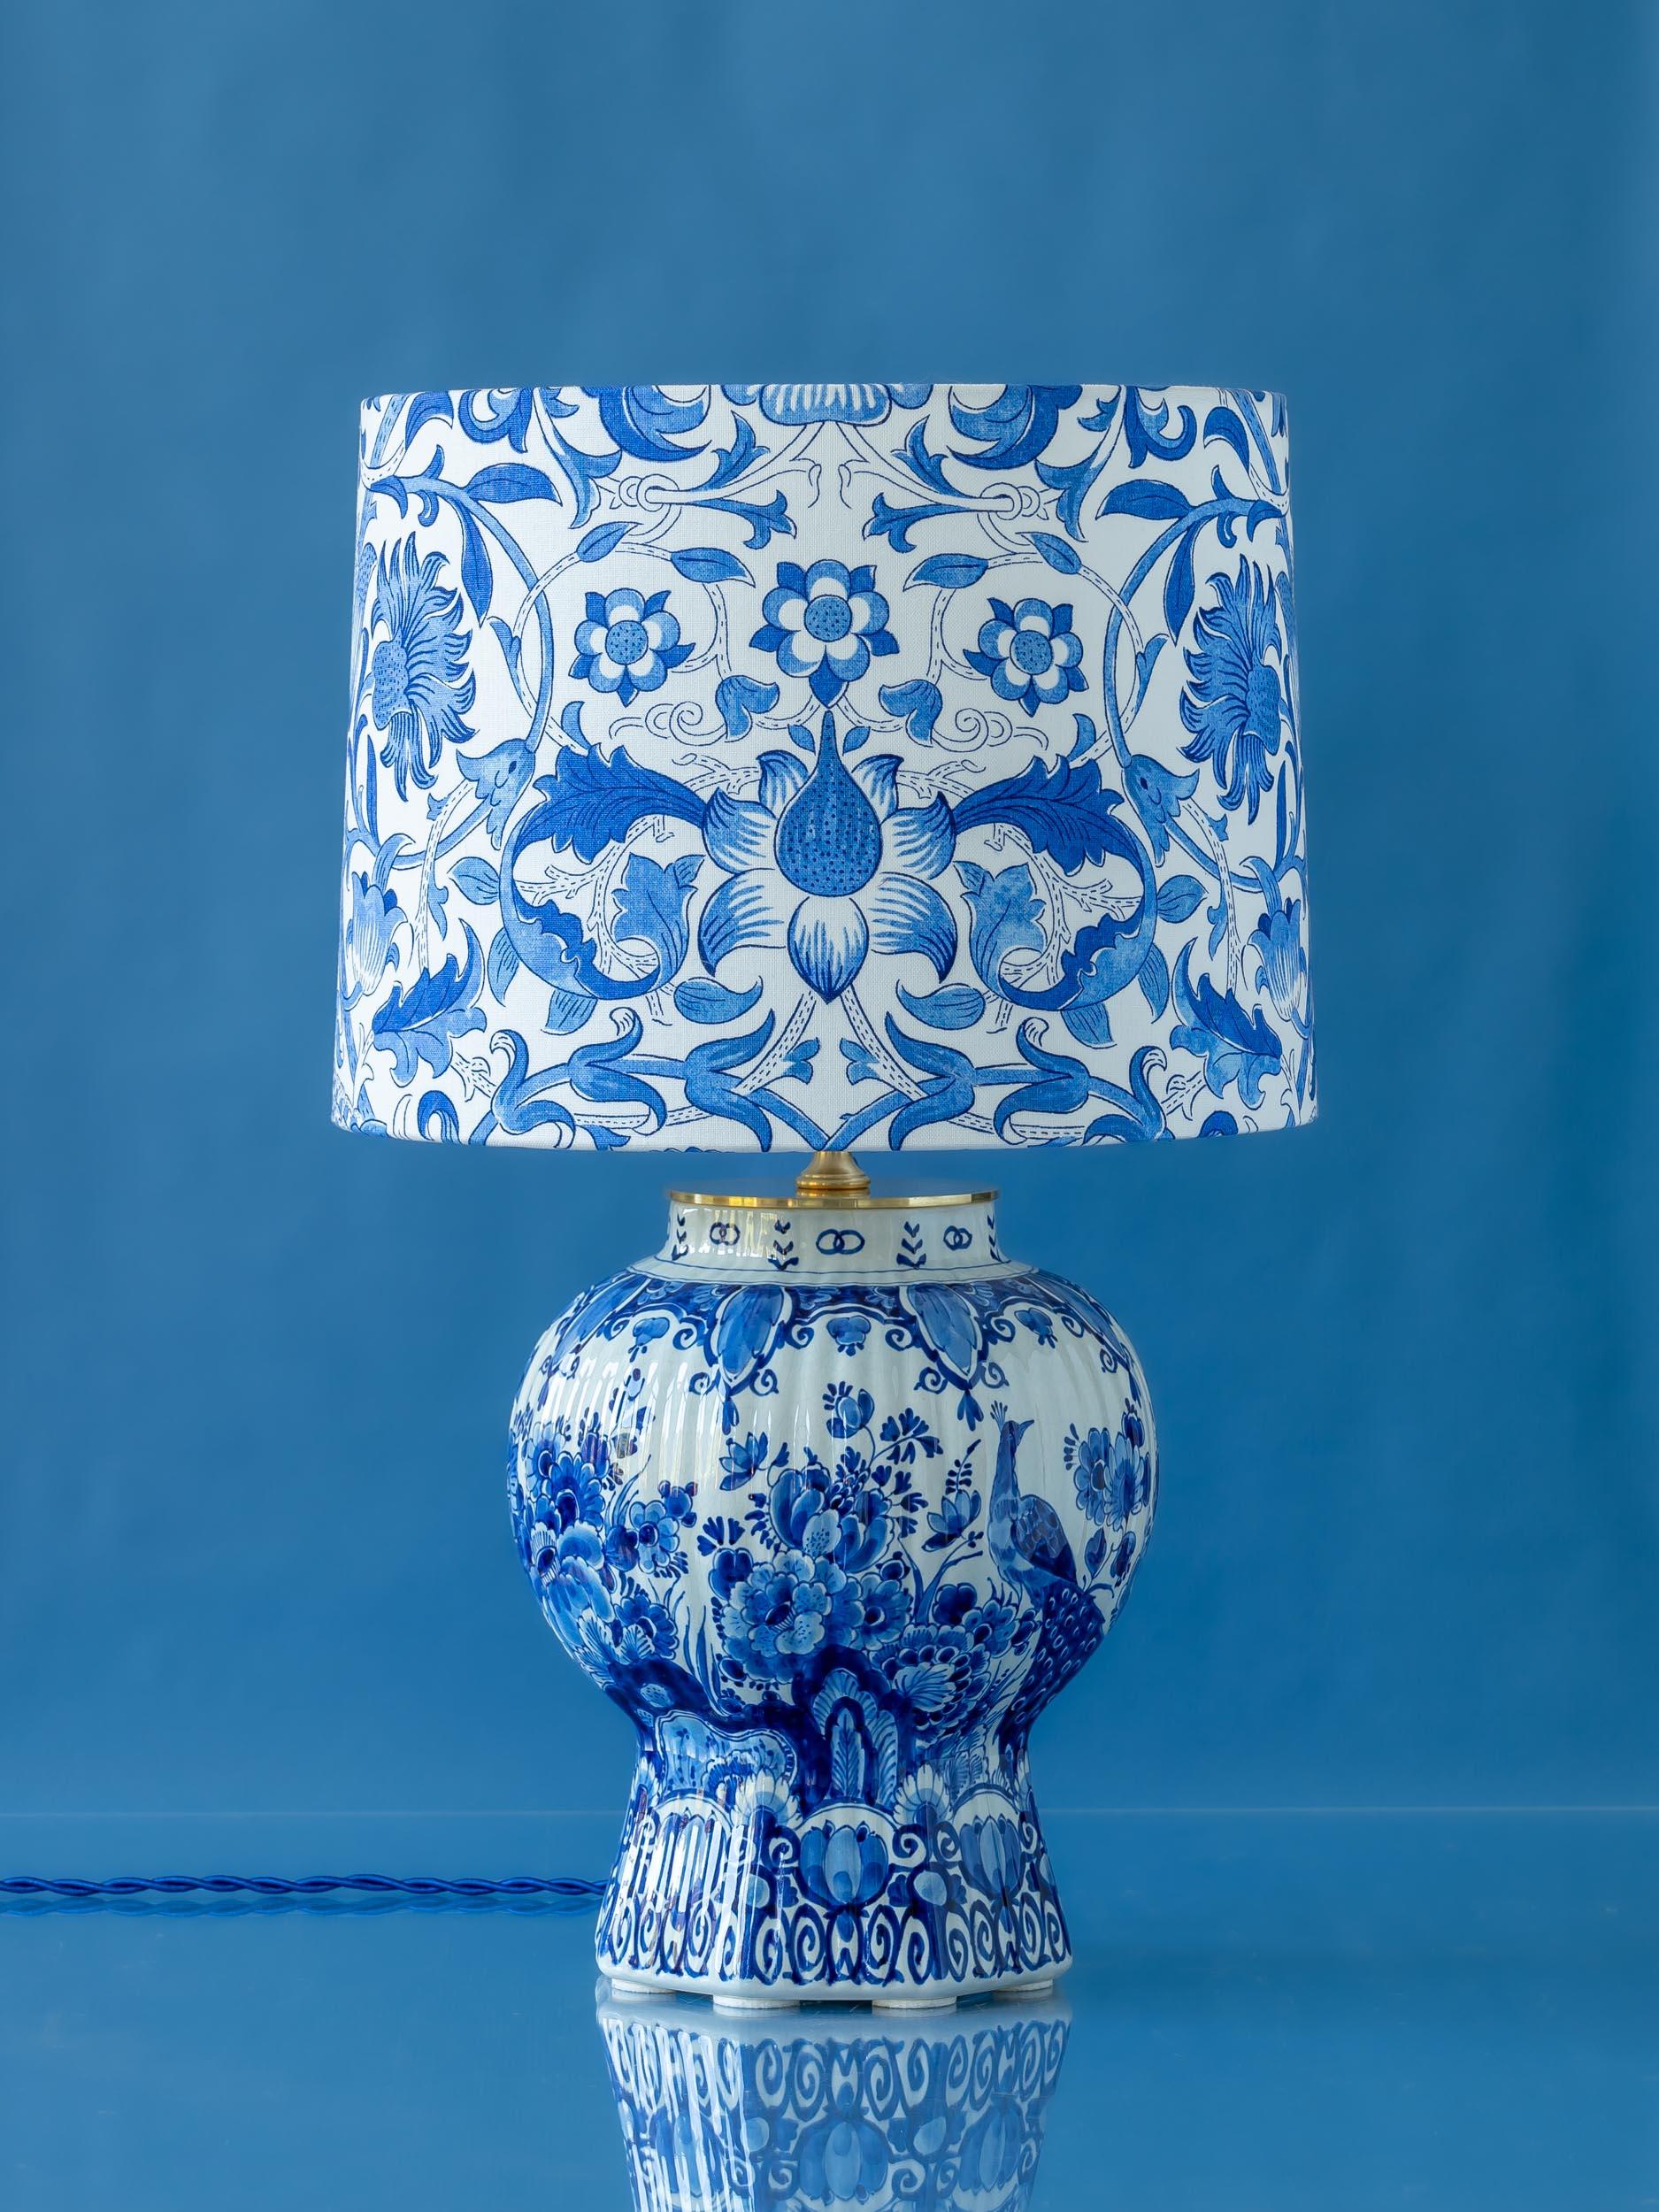 Meet Lodden a one-of-a-kind lamp lovingly handcrafted from a gorgeous, vintage, hand-painted Royal Delfts (De Proceleyne Fles) Delft Blue (Delfts Blauw) vase. The exquisite ribbed vase (or pul), which forms the base of the lamp, was handmade and